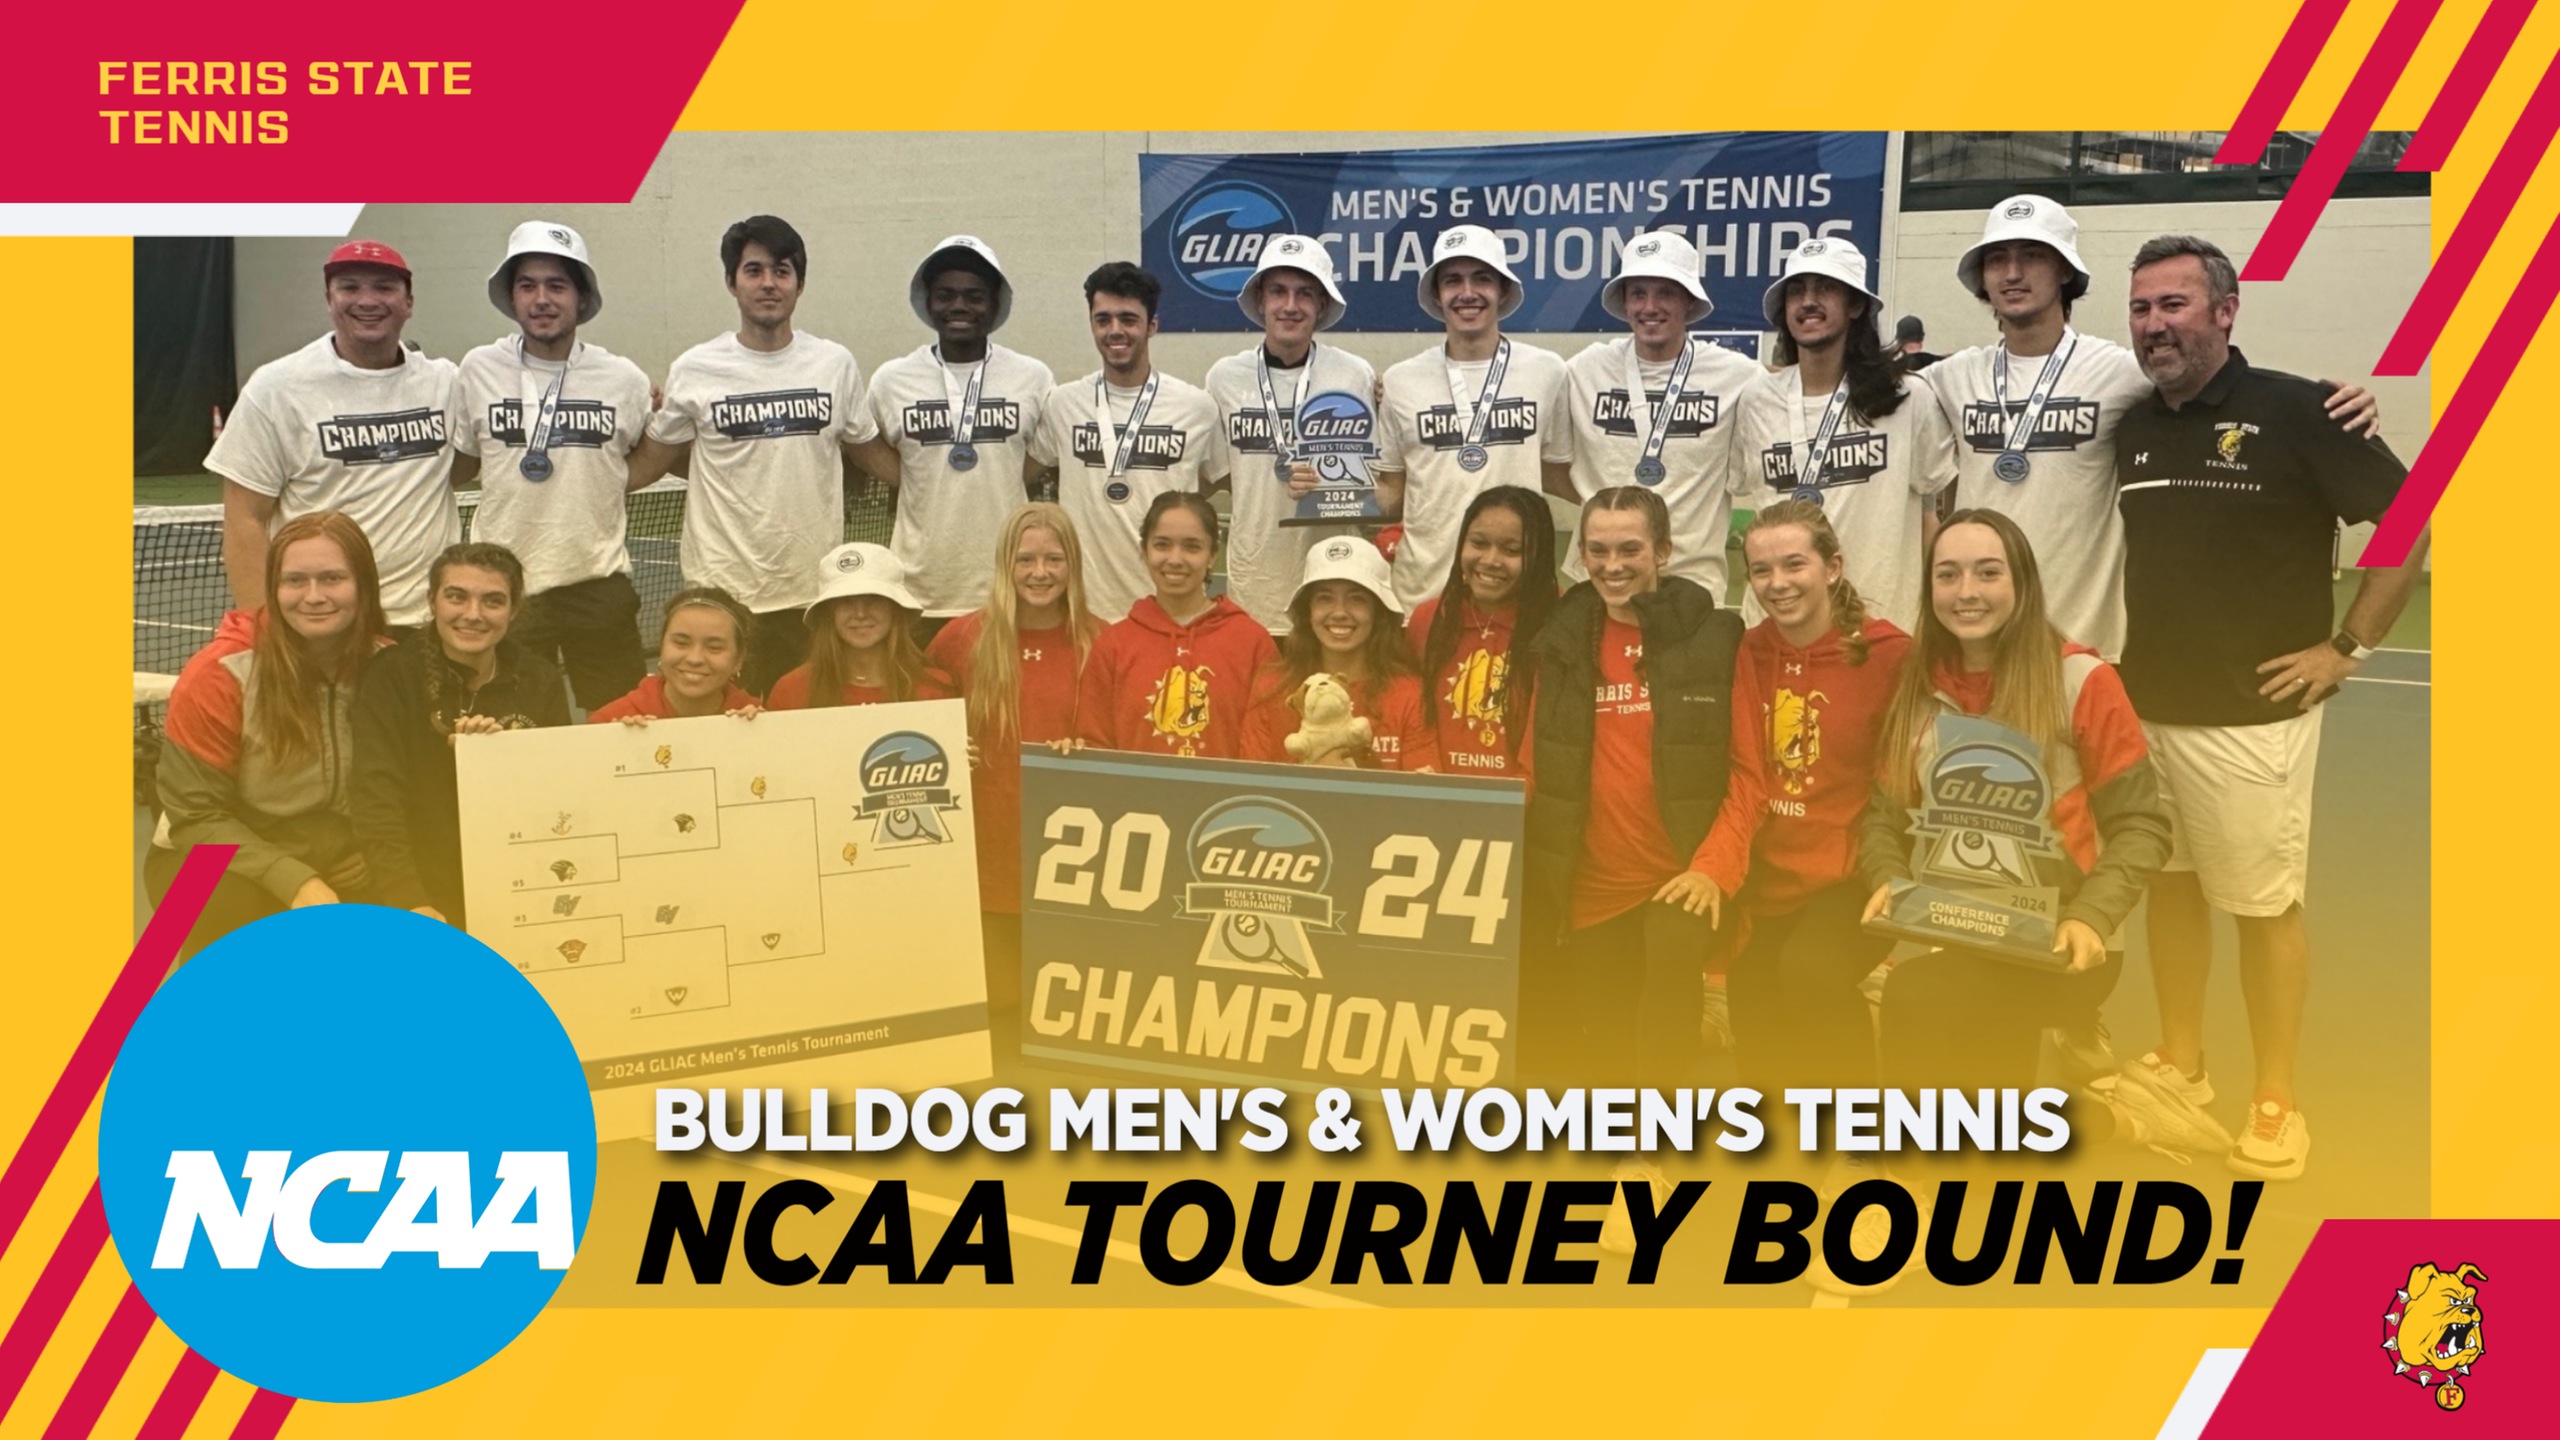 NCAA TOURNEY BOUND! Ferris State Tennis Teams Both Selected For NCAA Regional Tournament!